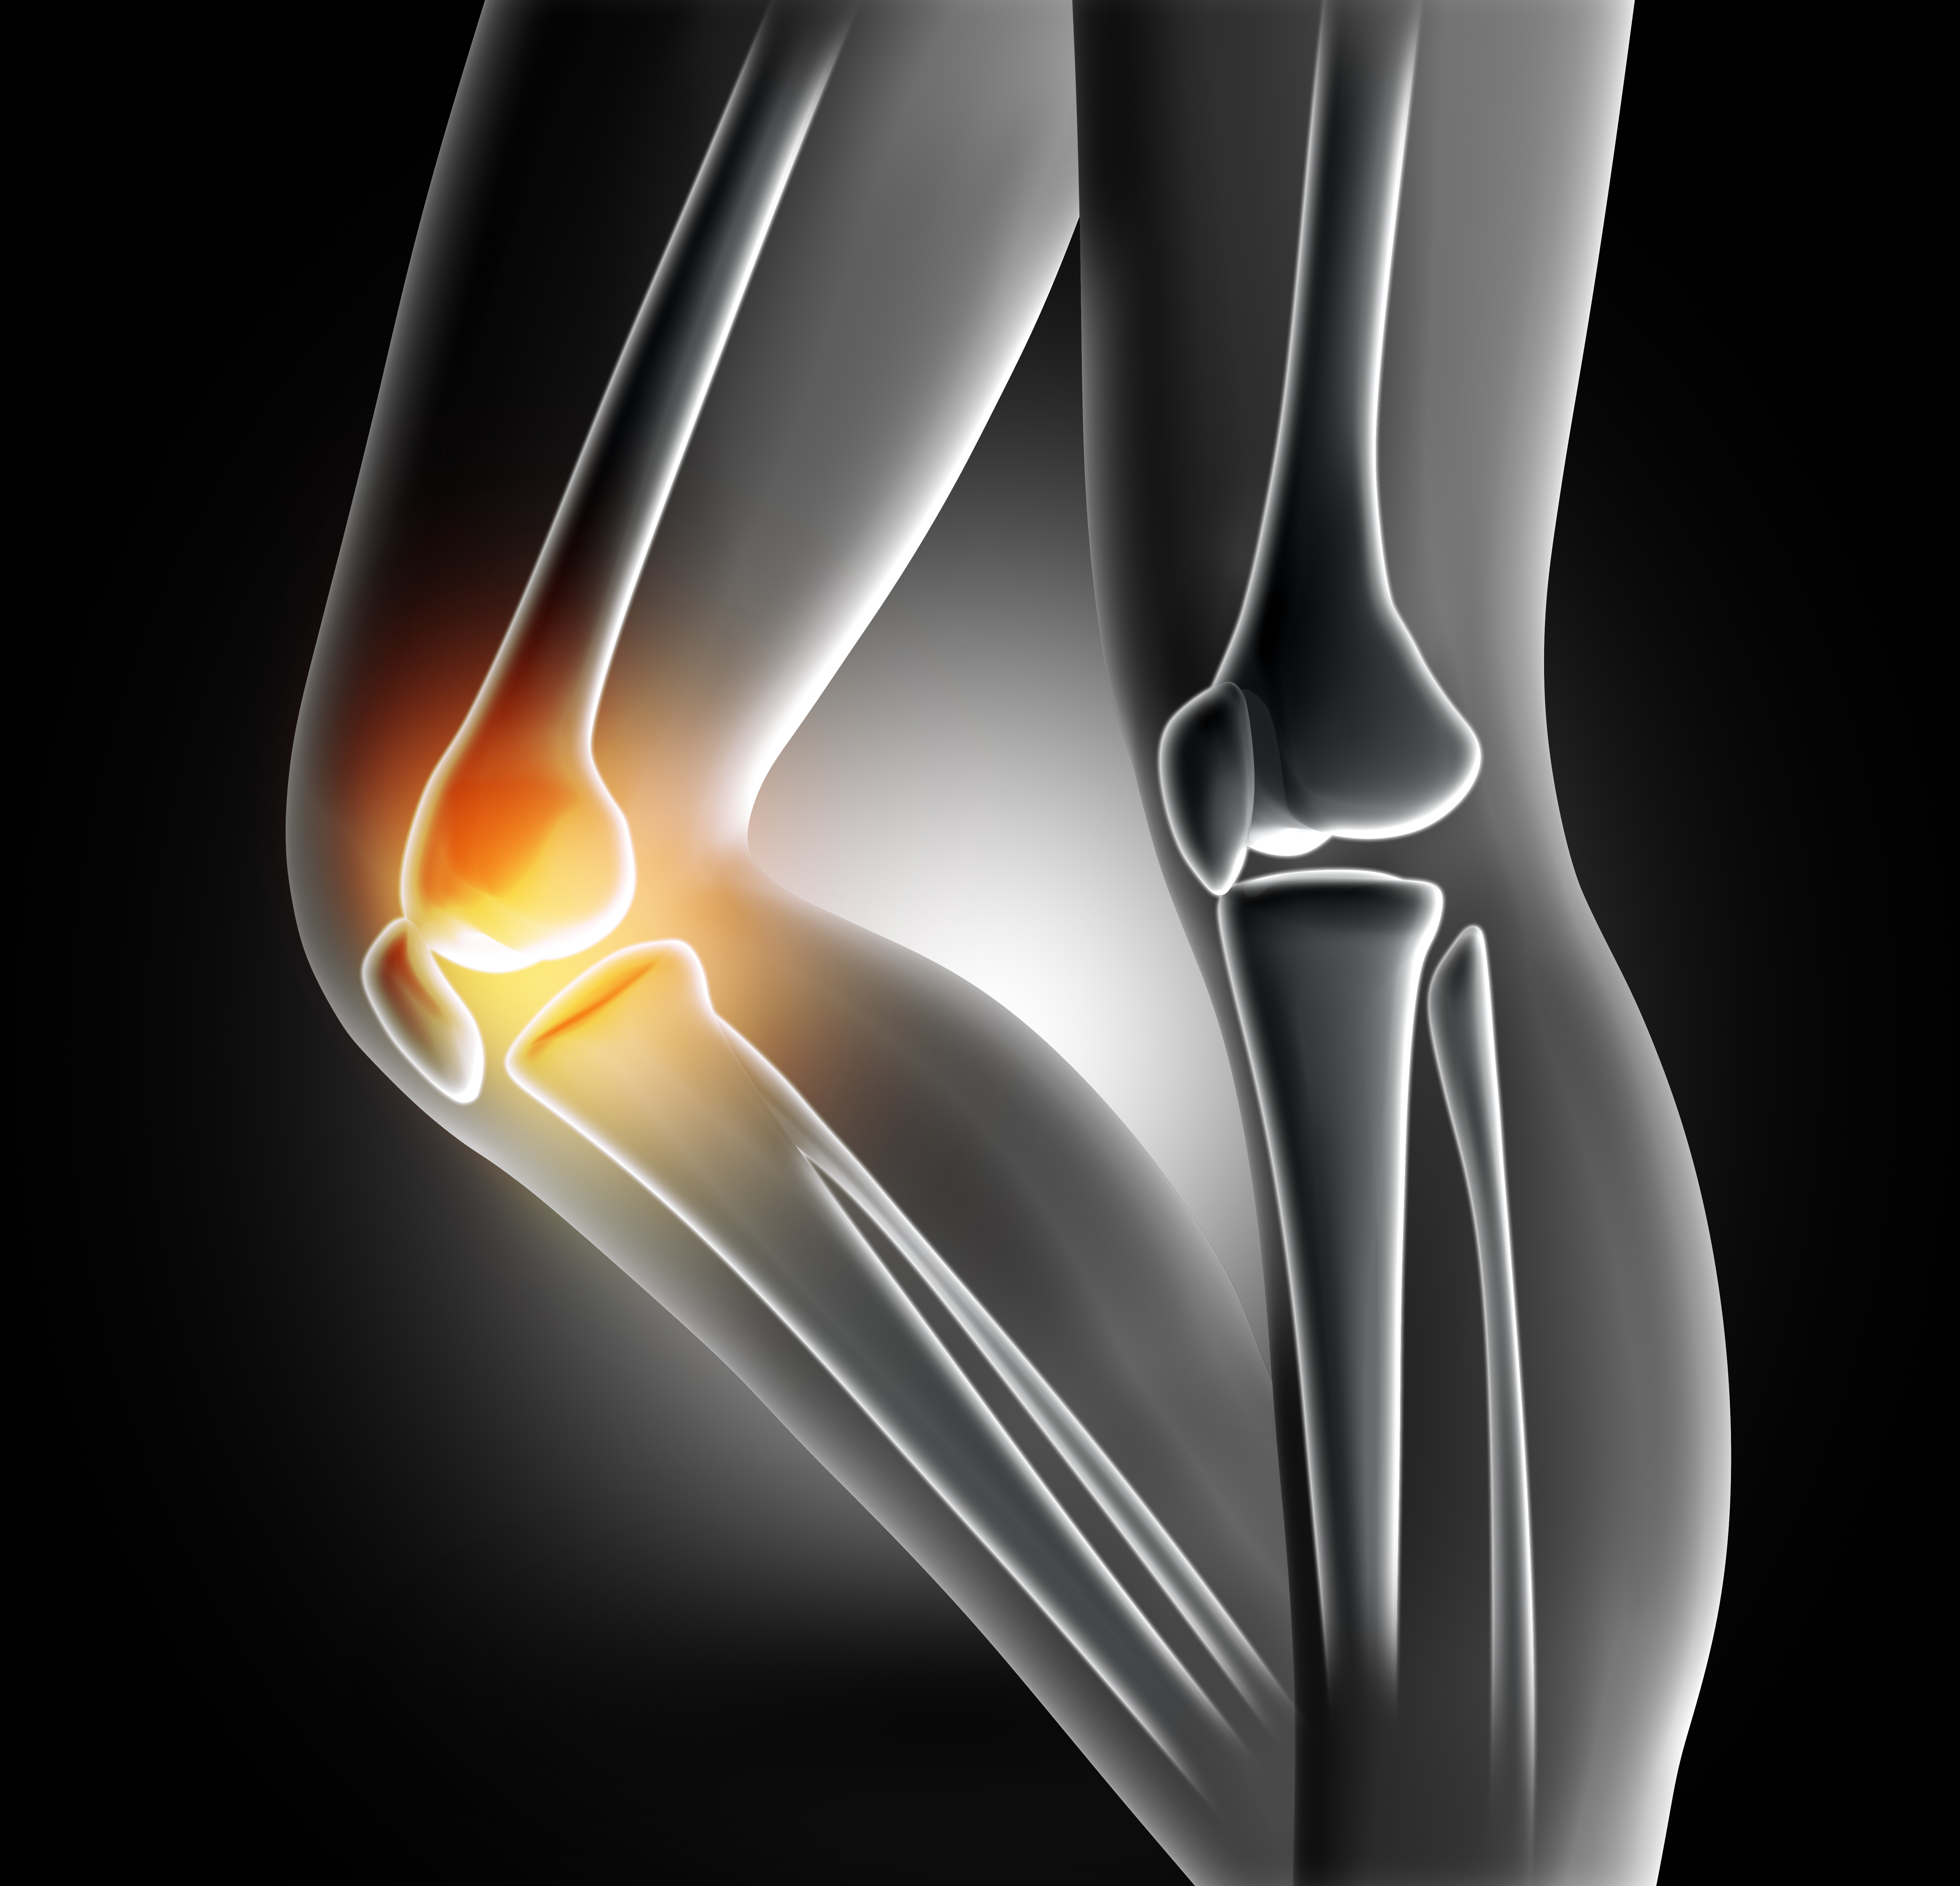 3D render of a female medical legs with bones in knee highlighted